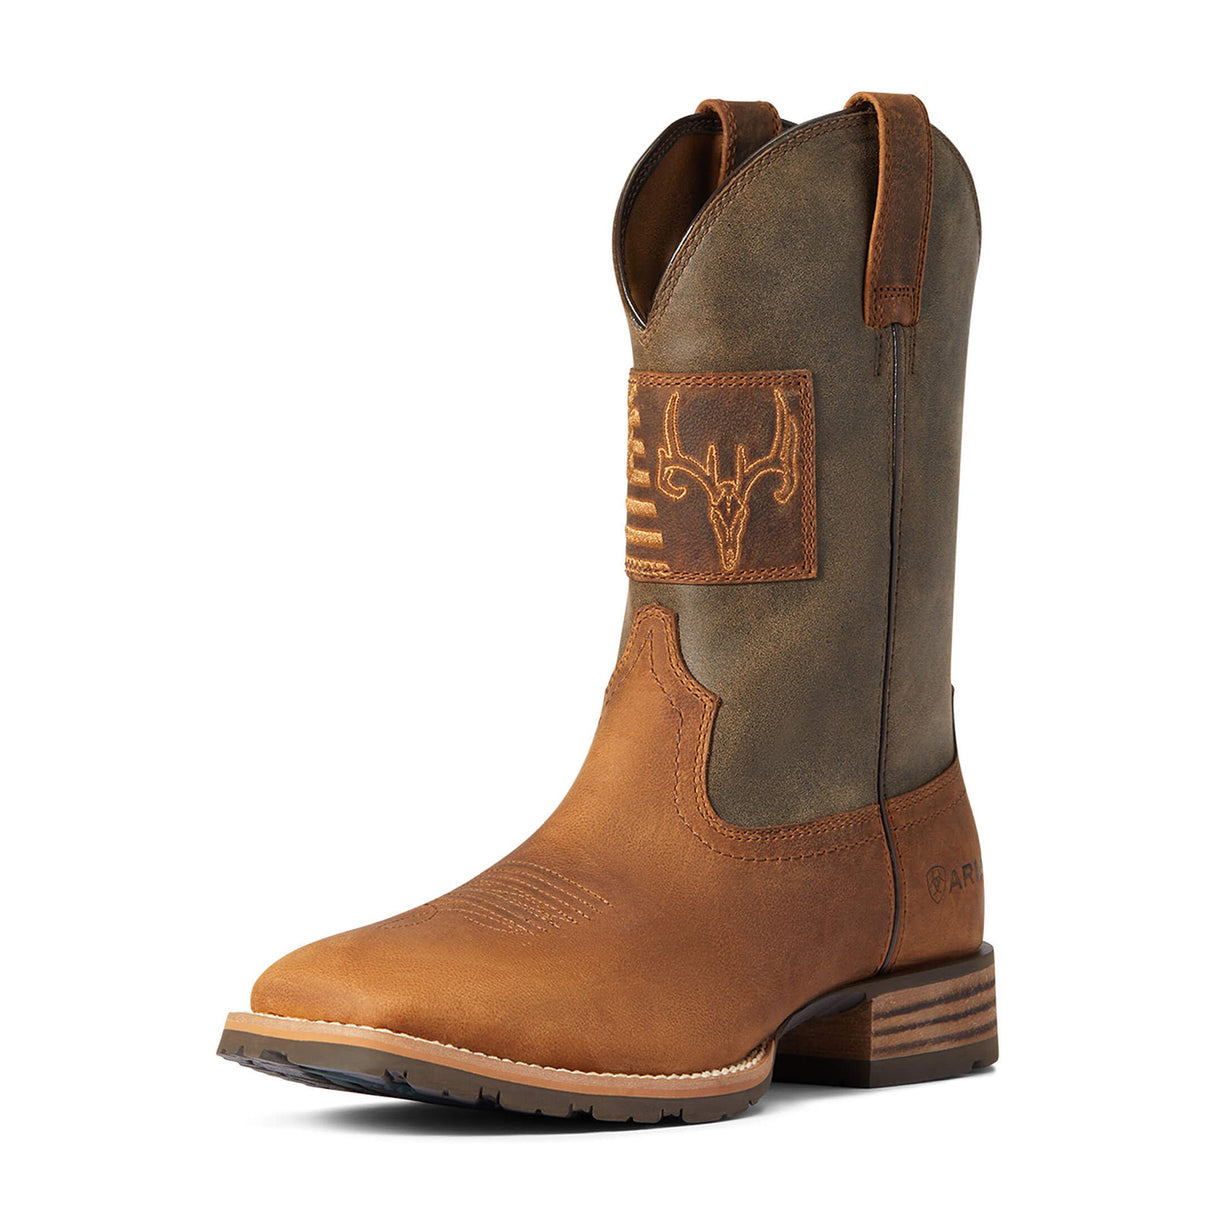 Ariat Hybrid Patriot Country Western Boot (Men) - Casper Brown Boots - Fashion - High - The Heel Shoe Fitters